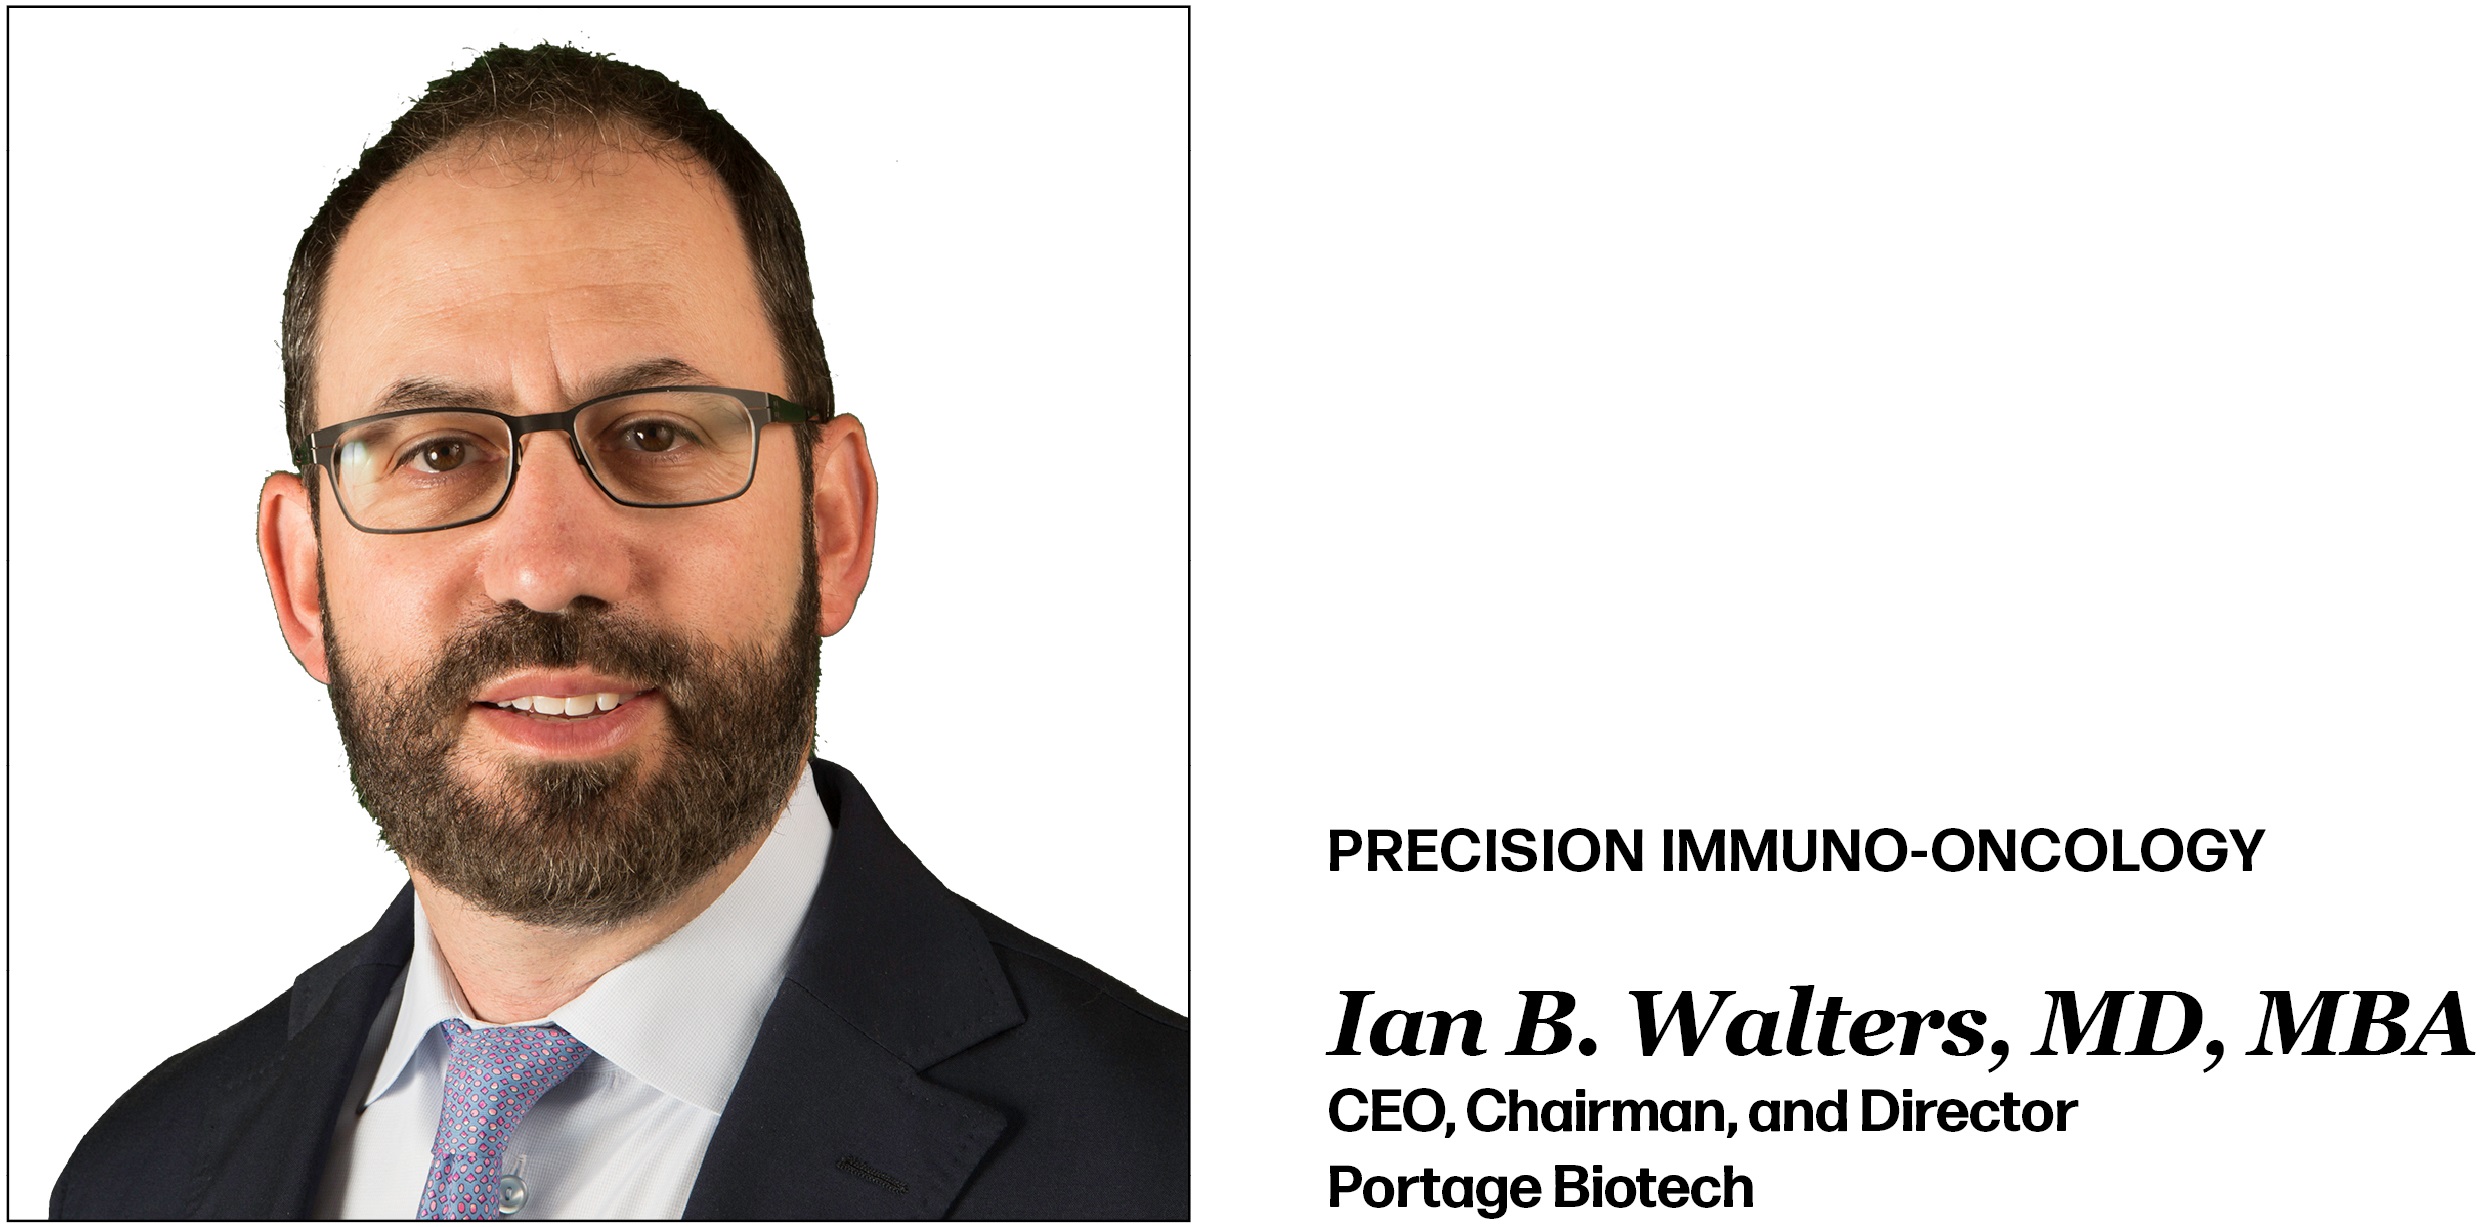 Precision Immuno-Oncology Ian B. Walters, MD, MBA CEO, Chairman, and Director Portage Biotech